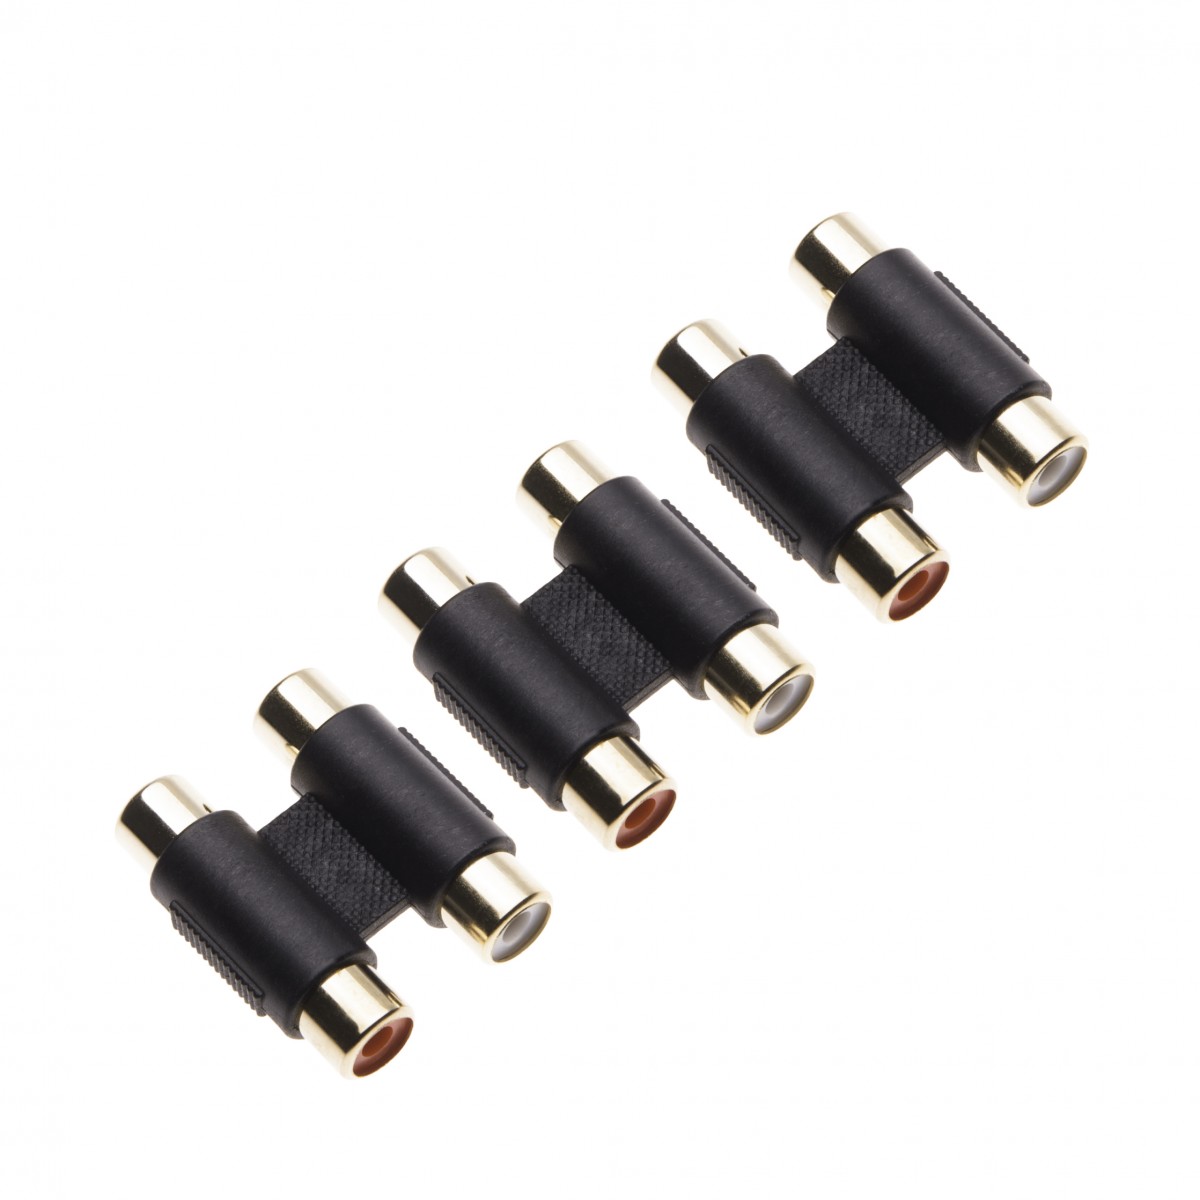 2rca F-F-1pack NANYI RCA Female to RCA Female Interconnect Coupler Adapter with Gold Plated Housing for Mixer Amplifiers Cable Link 